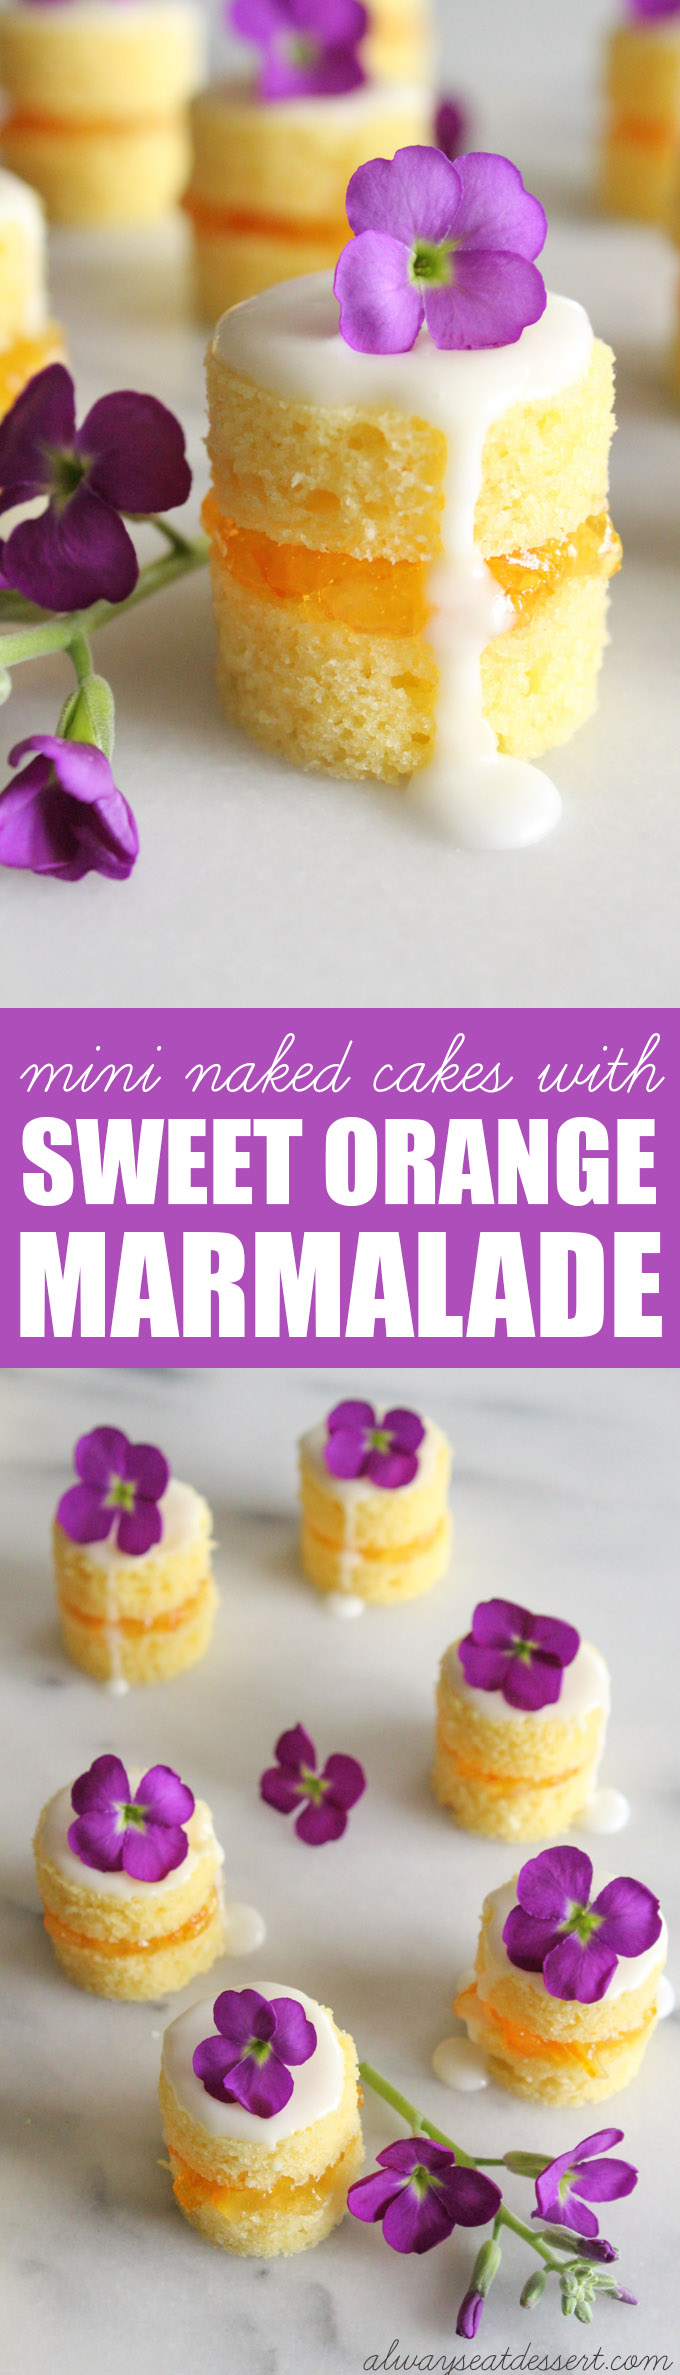 These mini naked cakes filled with sweet and tangy orange marmalade and garnished with fresh flowers are an elegant treat for a springtime brunch. They may look fancy, but they're simple to make.